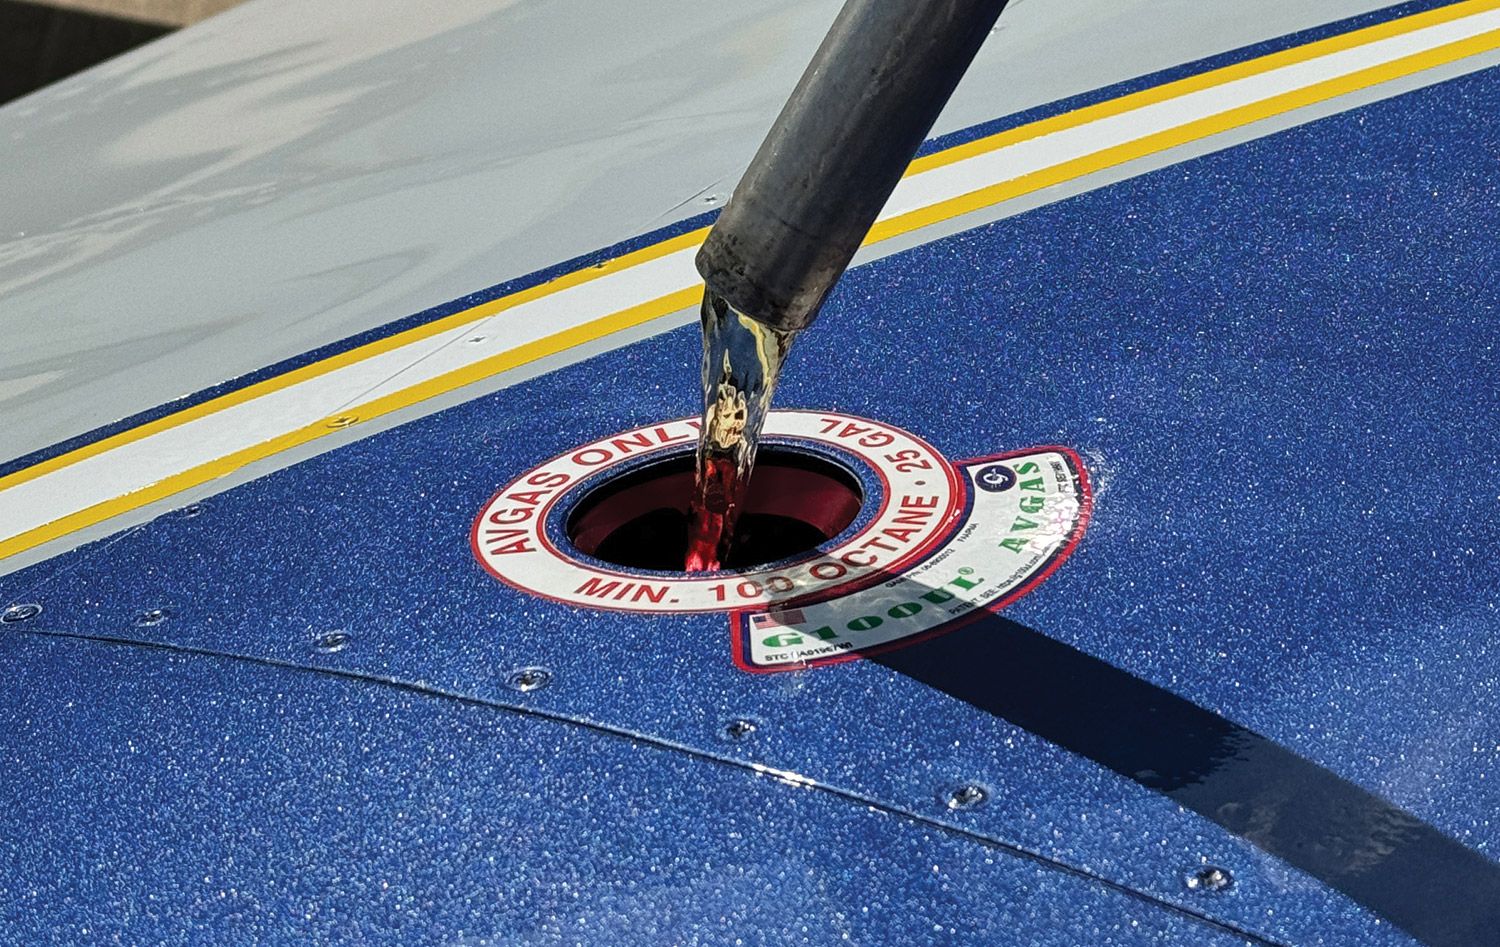 Aircraft operators in California will likely be the first to be able to fill their tanks with unleaded 100 octane aviation fuel. General Aviation Mo